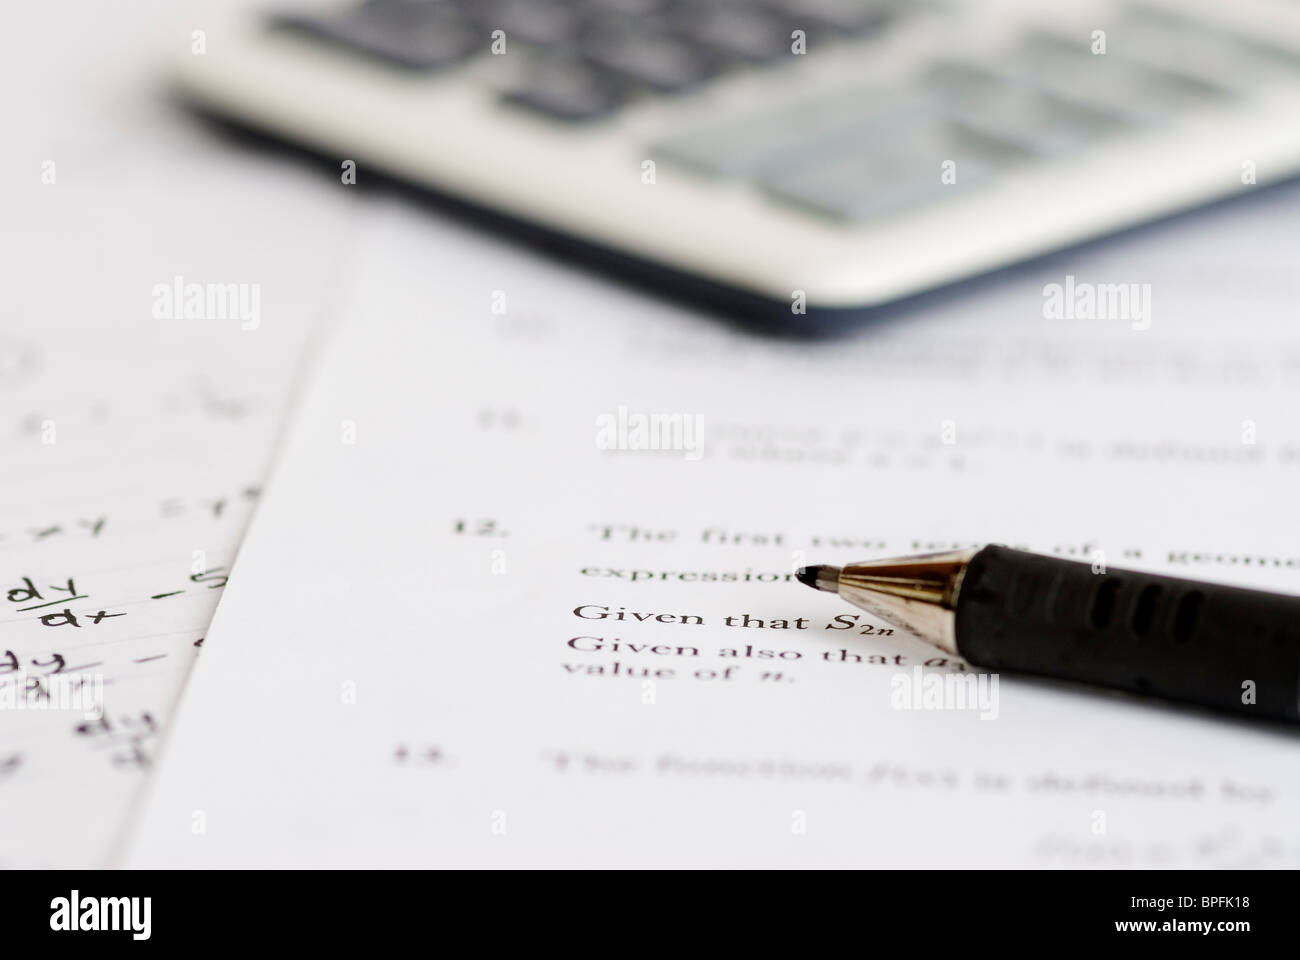 Mathematics questions with rough written answers. Stock Photo